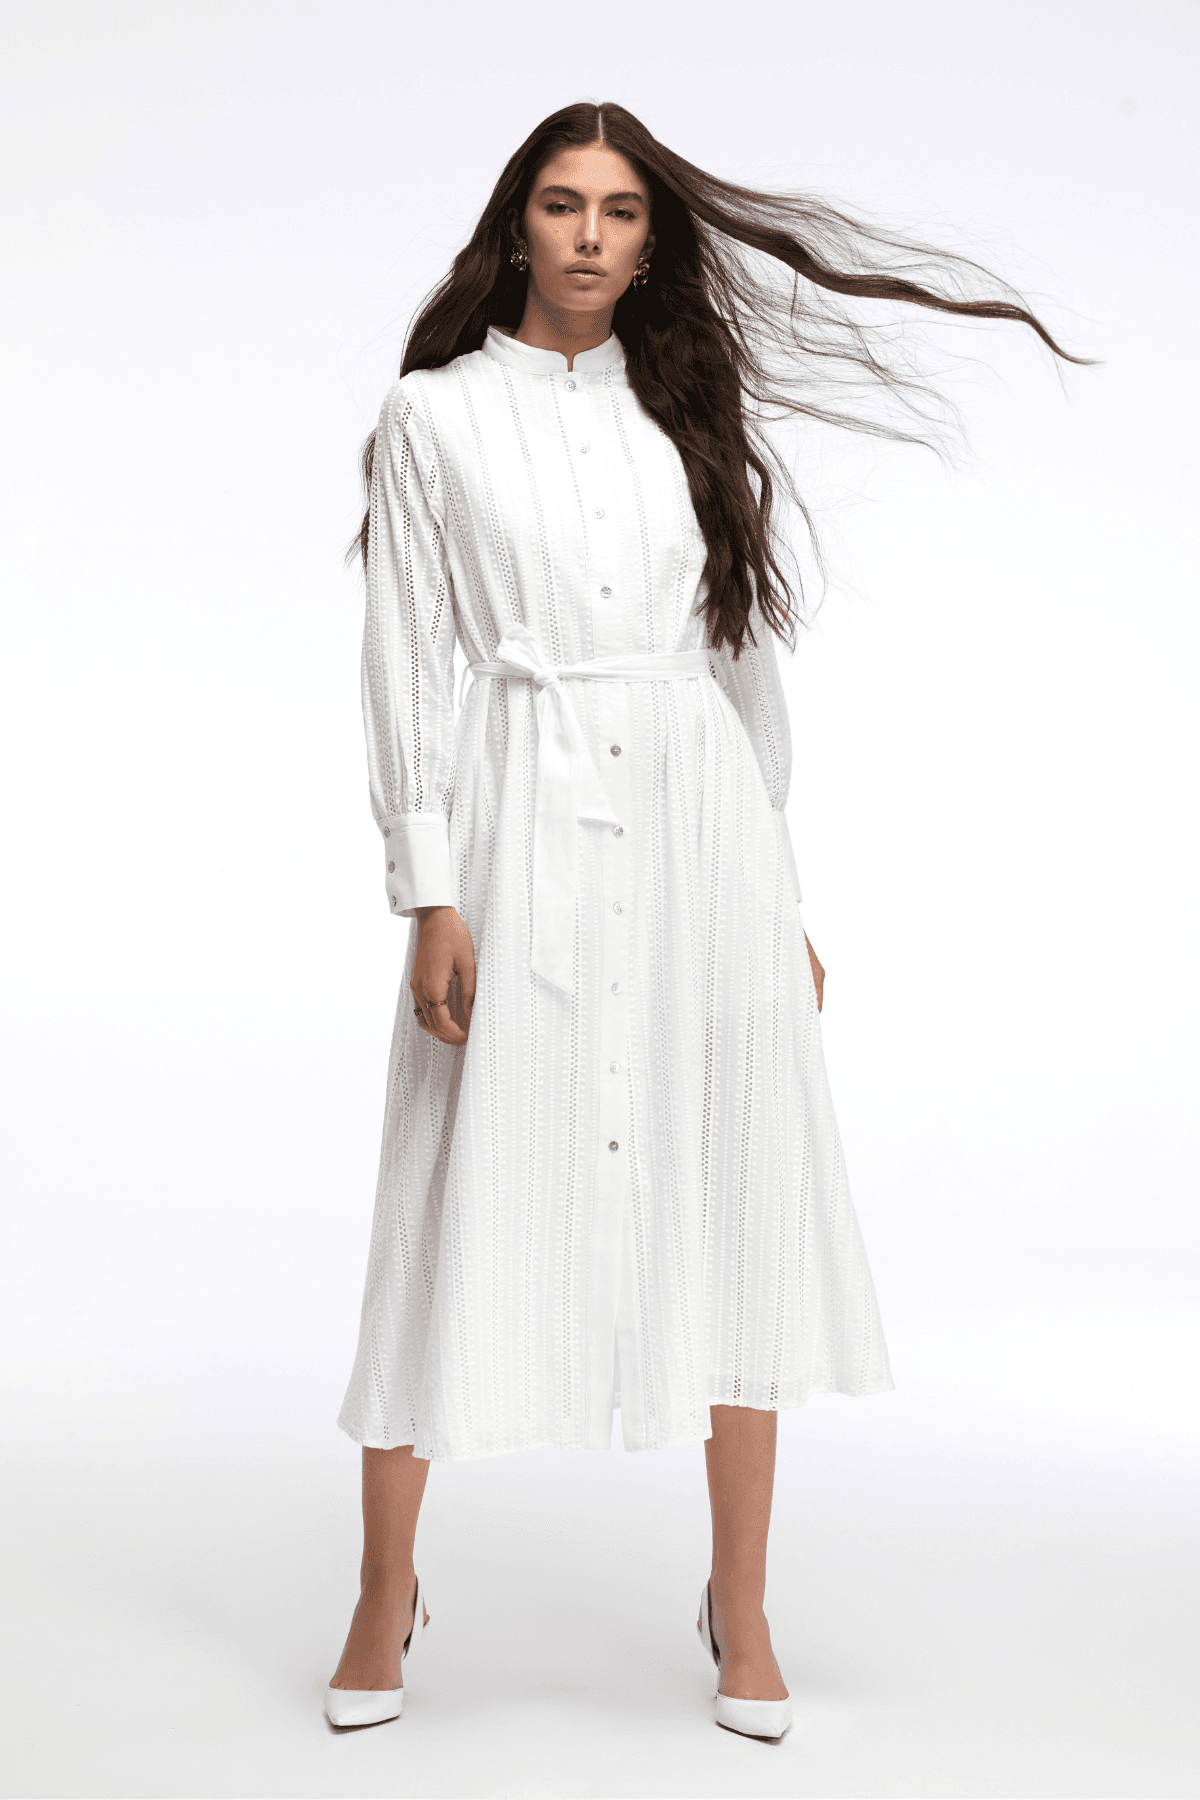 Tipped Belted Long White Embroidered Cotton Dress